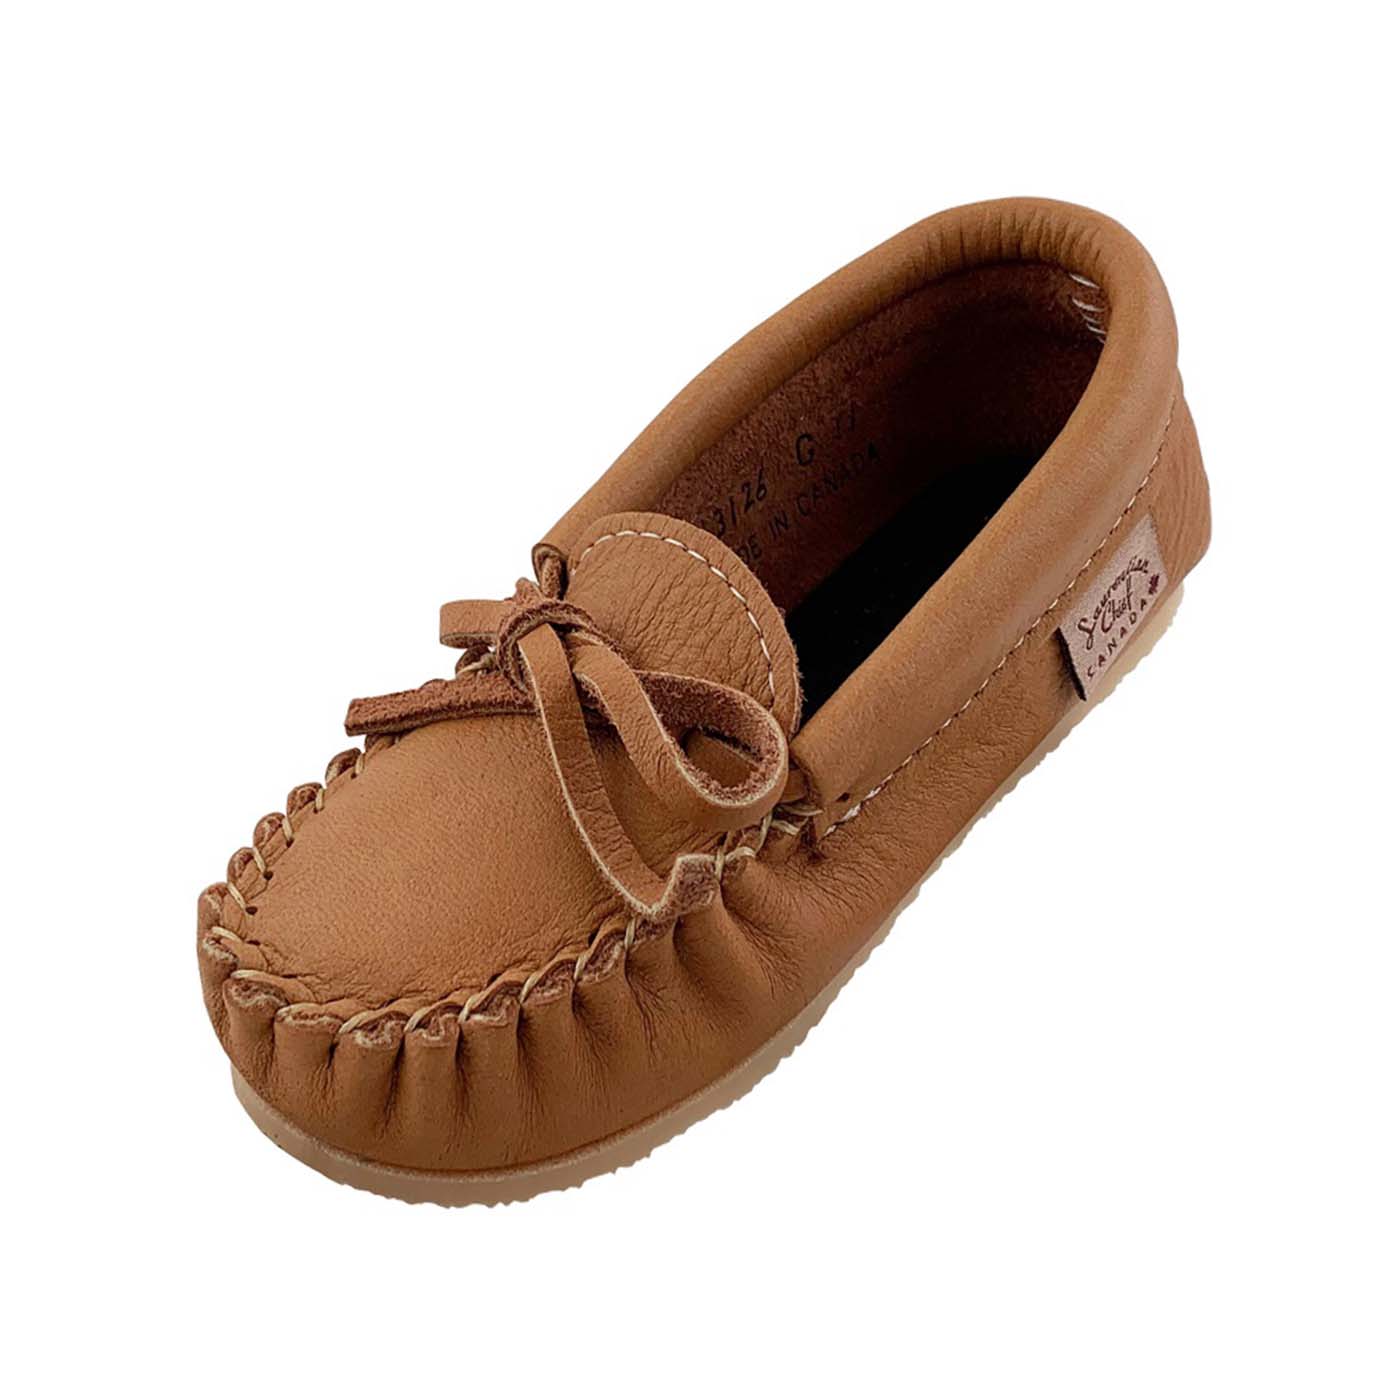 Children's Moose Hide Leather Moccasin Shoes